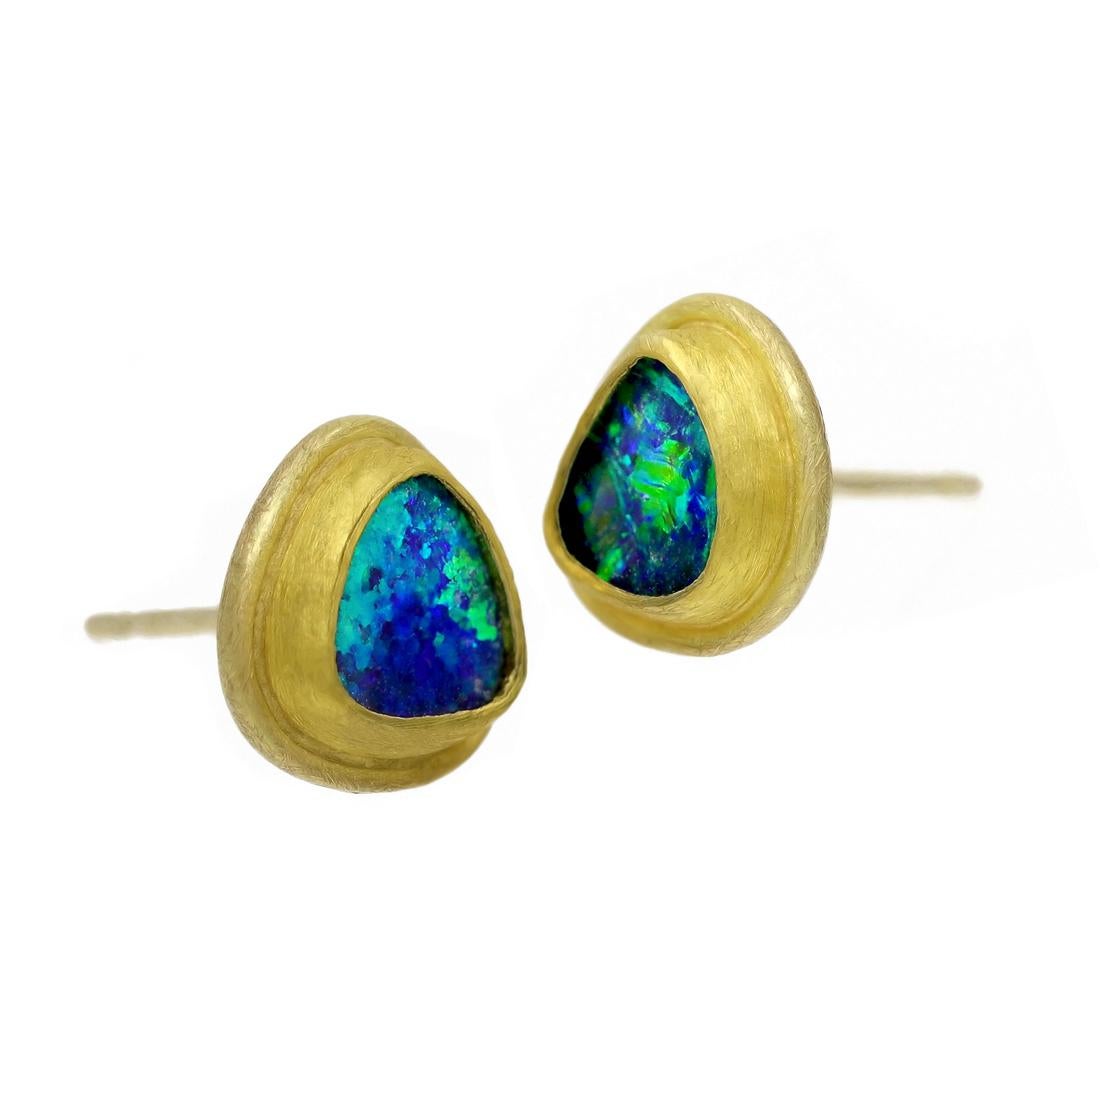 Opal Doublet Earrings handcrafted by acclaimed jewelry maker Petra Class featuring a fantastic matched pair of deep blue Australian opal doublets with strong electric green fire, bezel-set and framed in the artist's intricately-textured 22k yellow